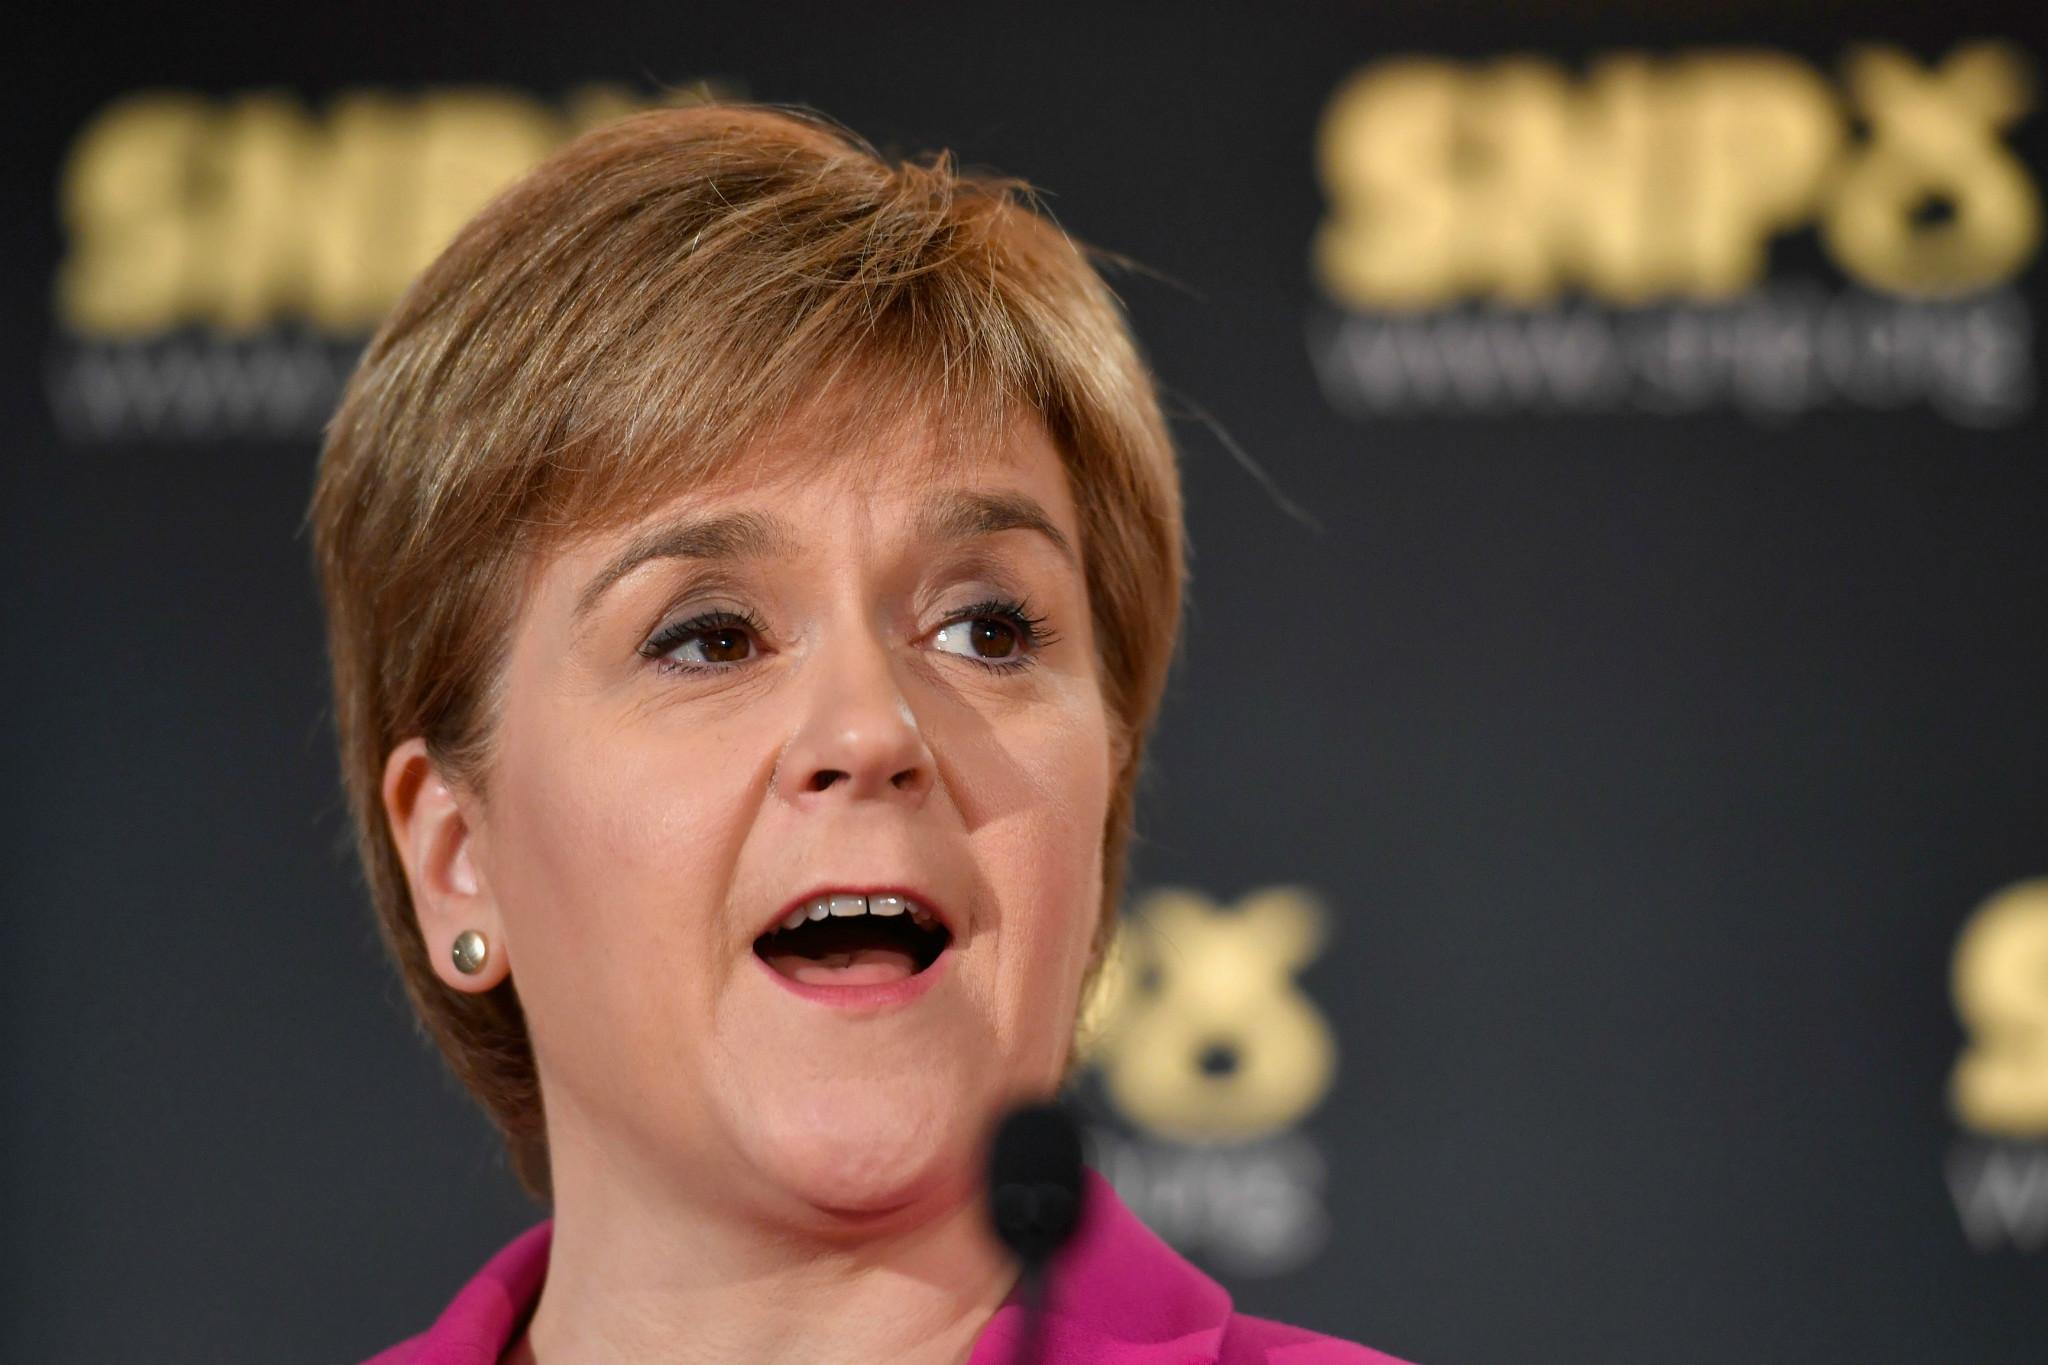 Nicola Sturgeon has hit out at those demanding a 'hard Brexit' and says her party will fight it